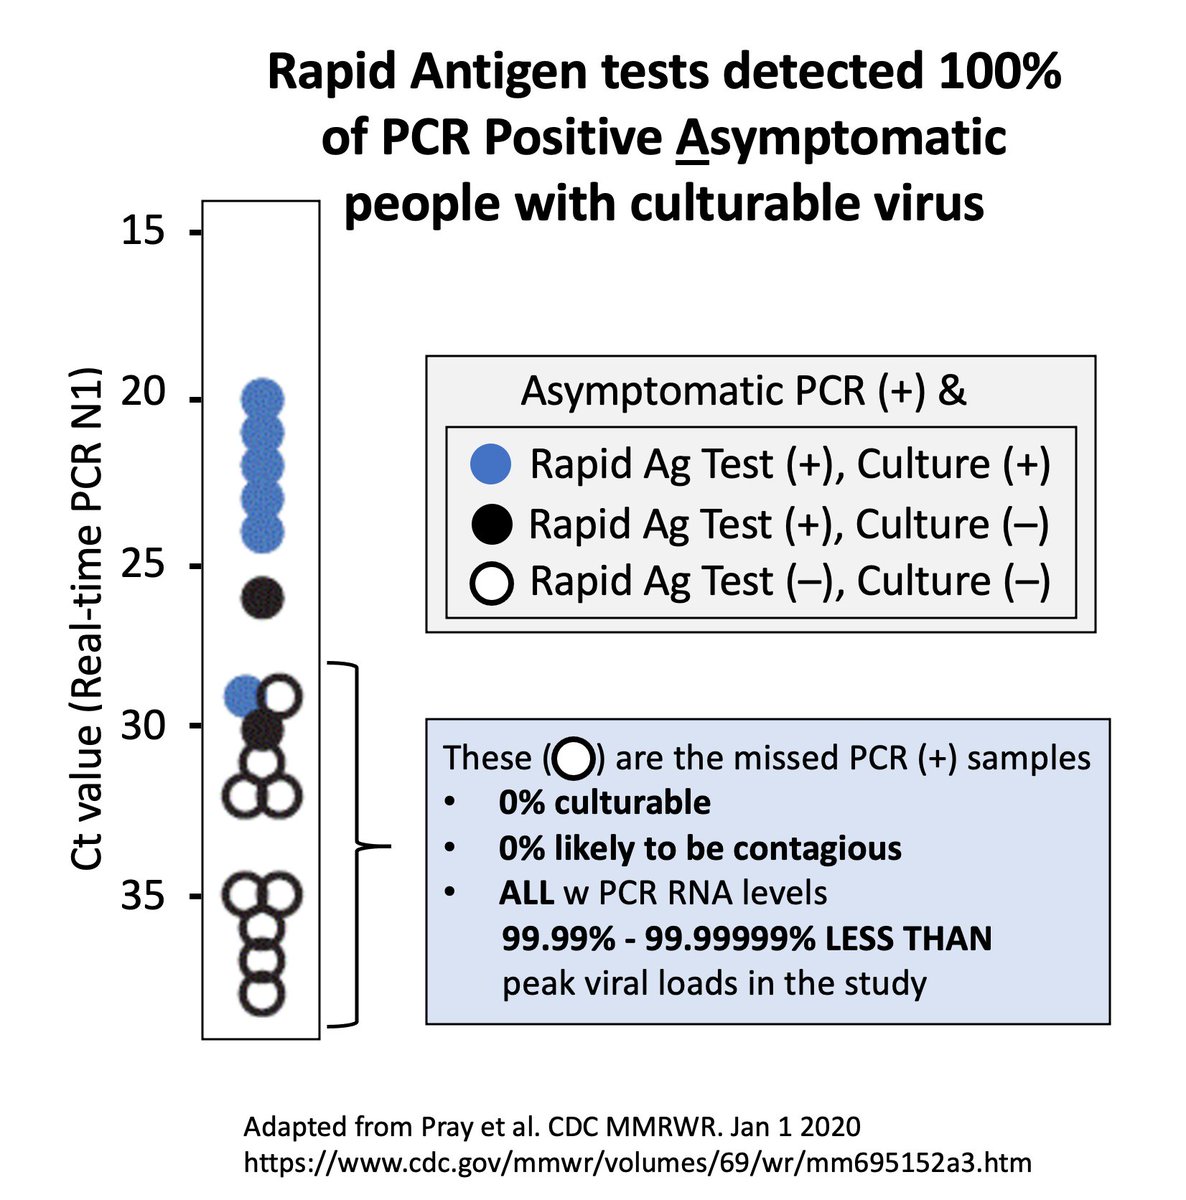 The very paper  @CDCgov links to that concludes rapid Ag tests do not perform well in Asymptomatics literally shows 100% sensitivity for culture +ve samples in AsymptomaticsMassive failure to not emphasize this for asymptomatic screening. https://www.cdc.gov/mmwr/volumes/69/wr/mm695152a3.htm